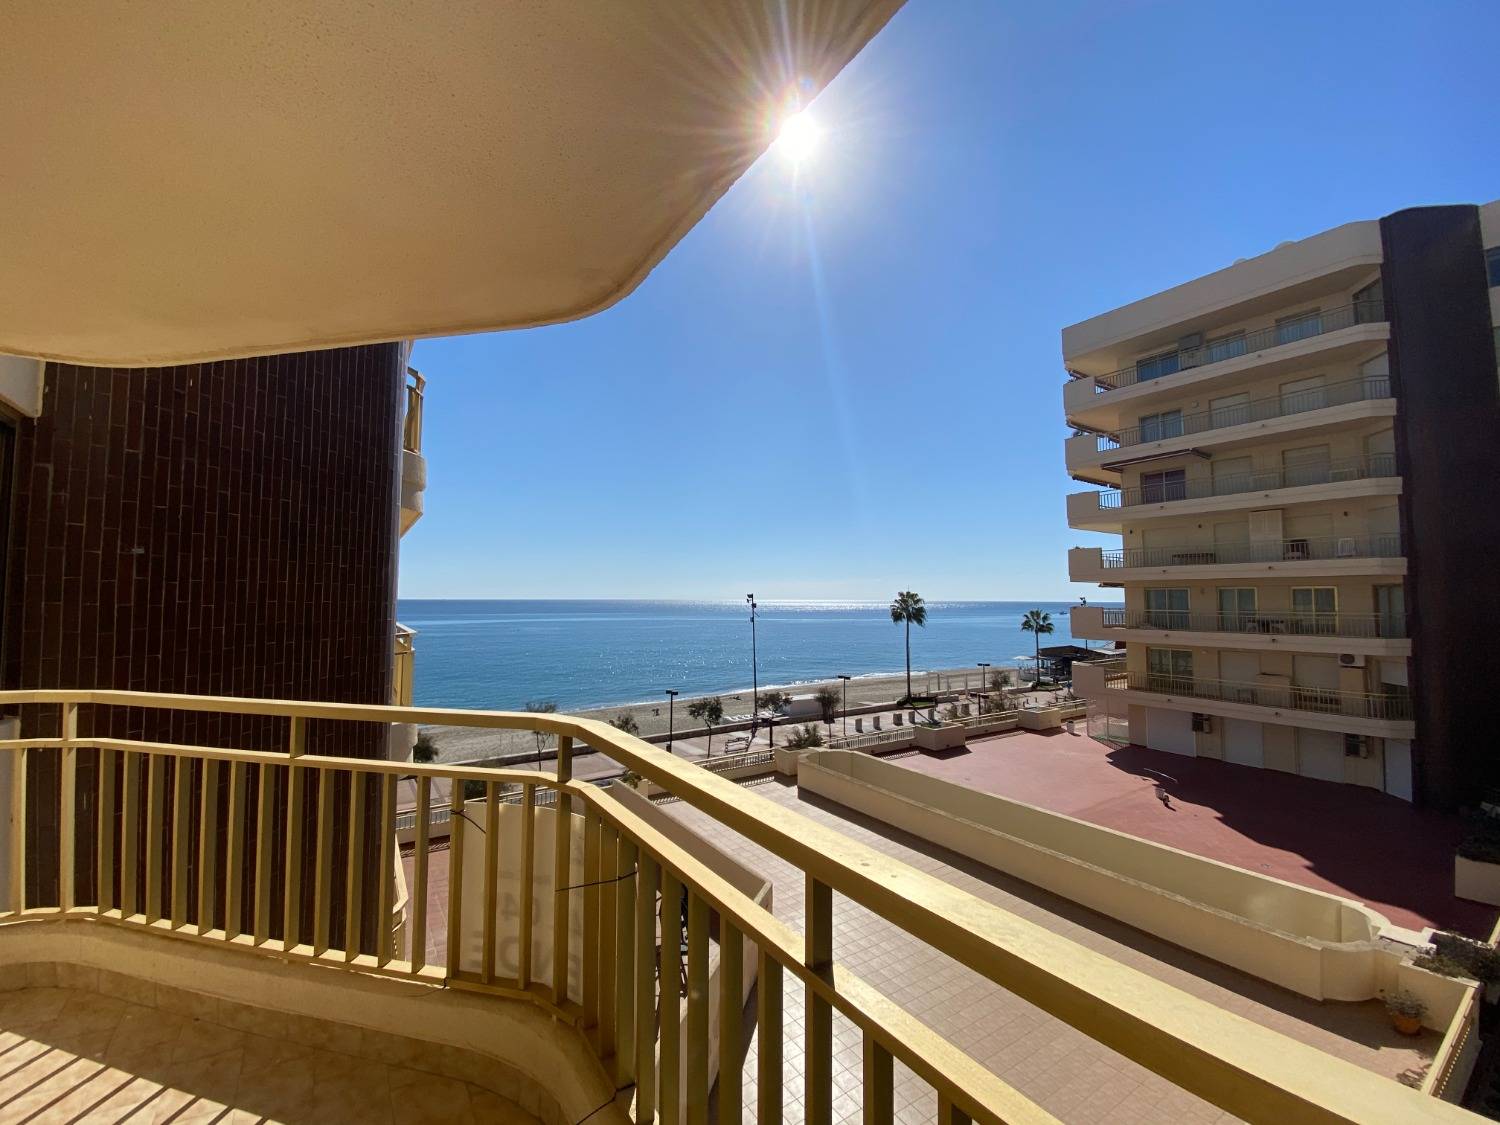 A few meters from the beach . On the beachfront in Fuengirola